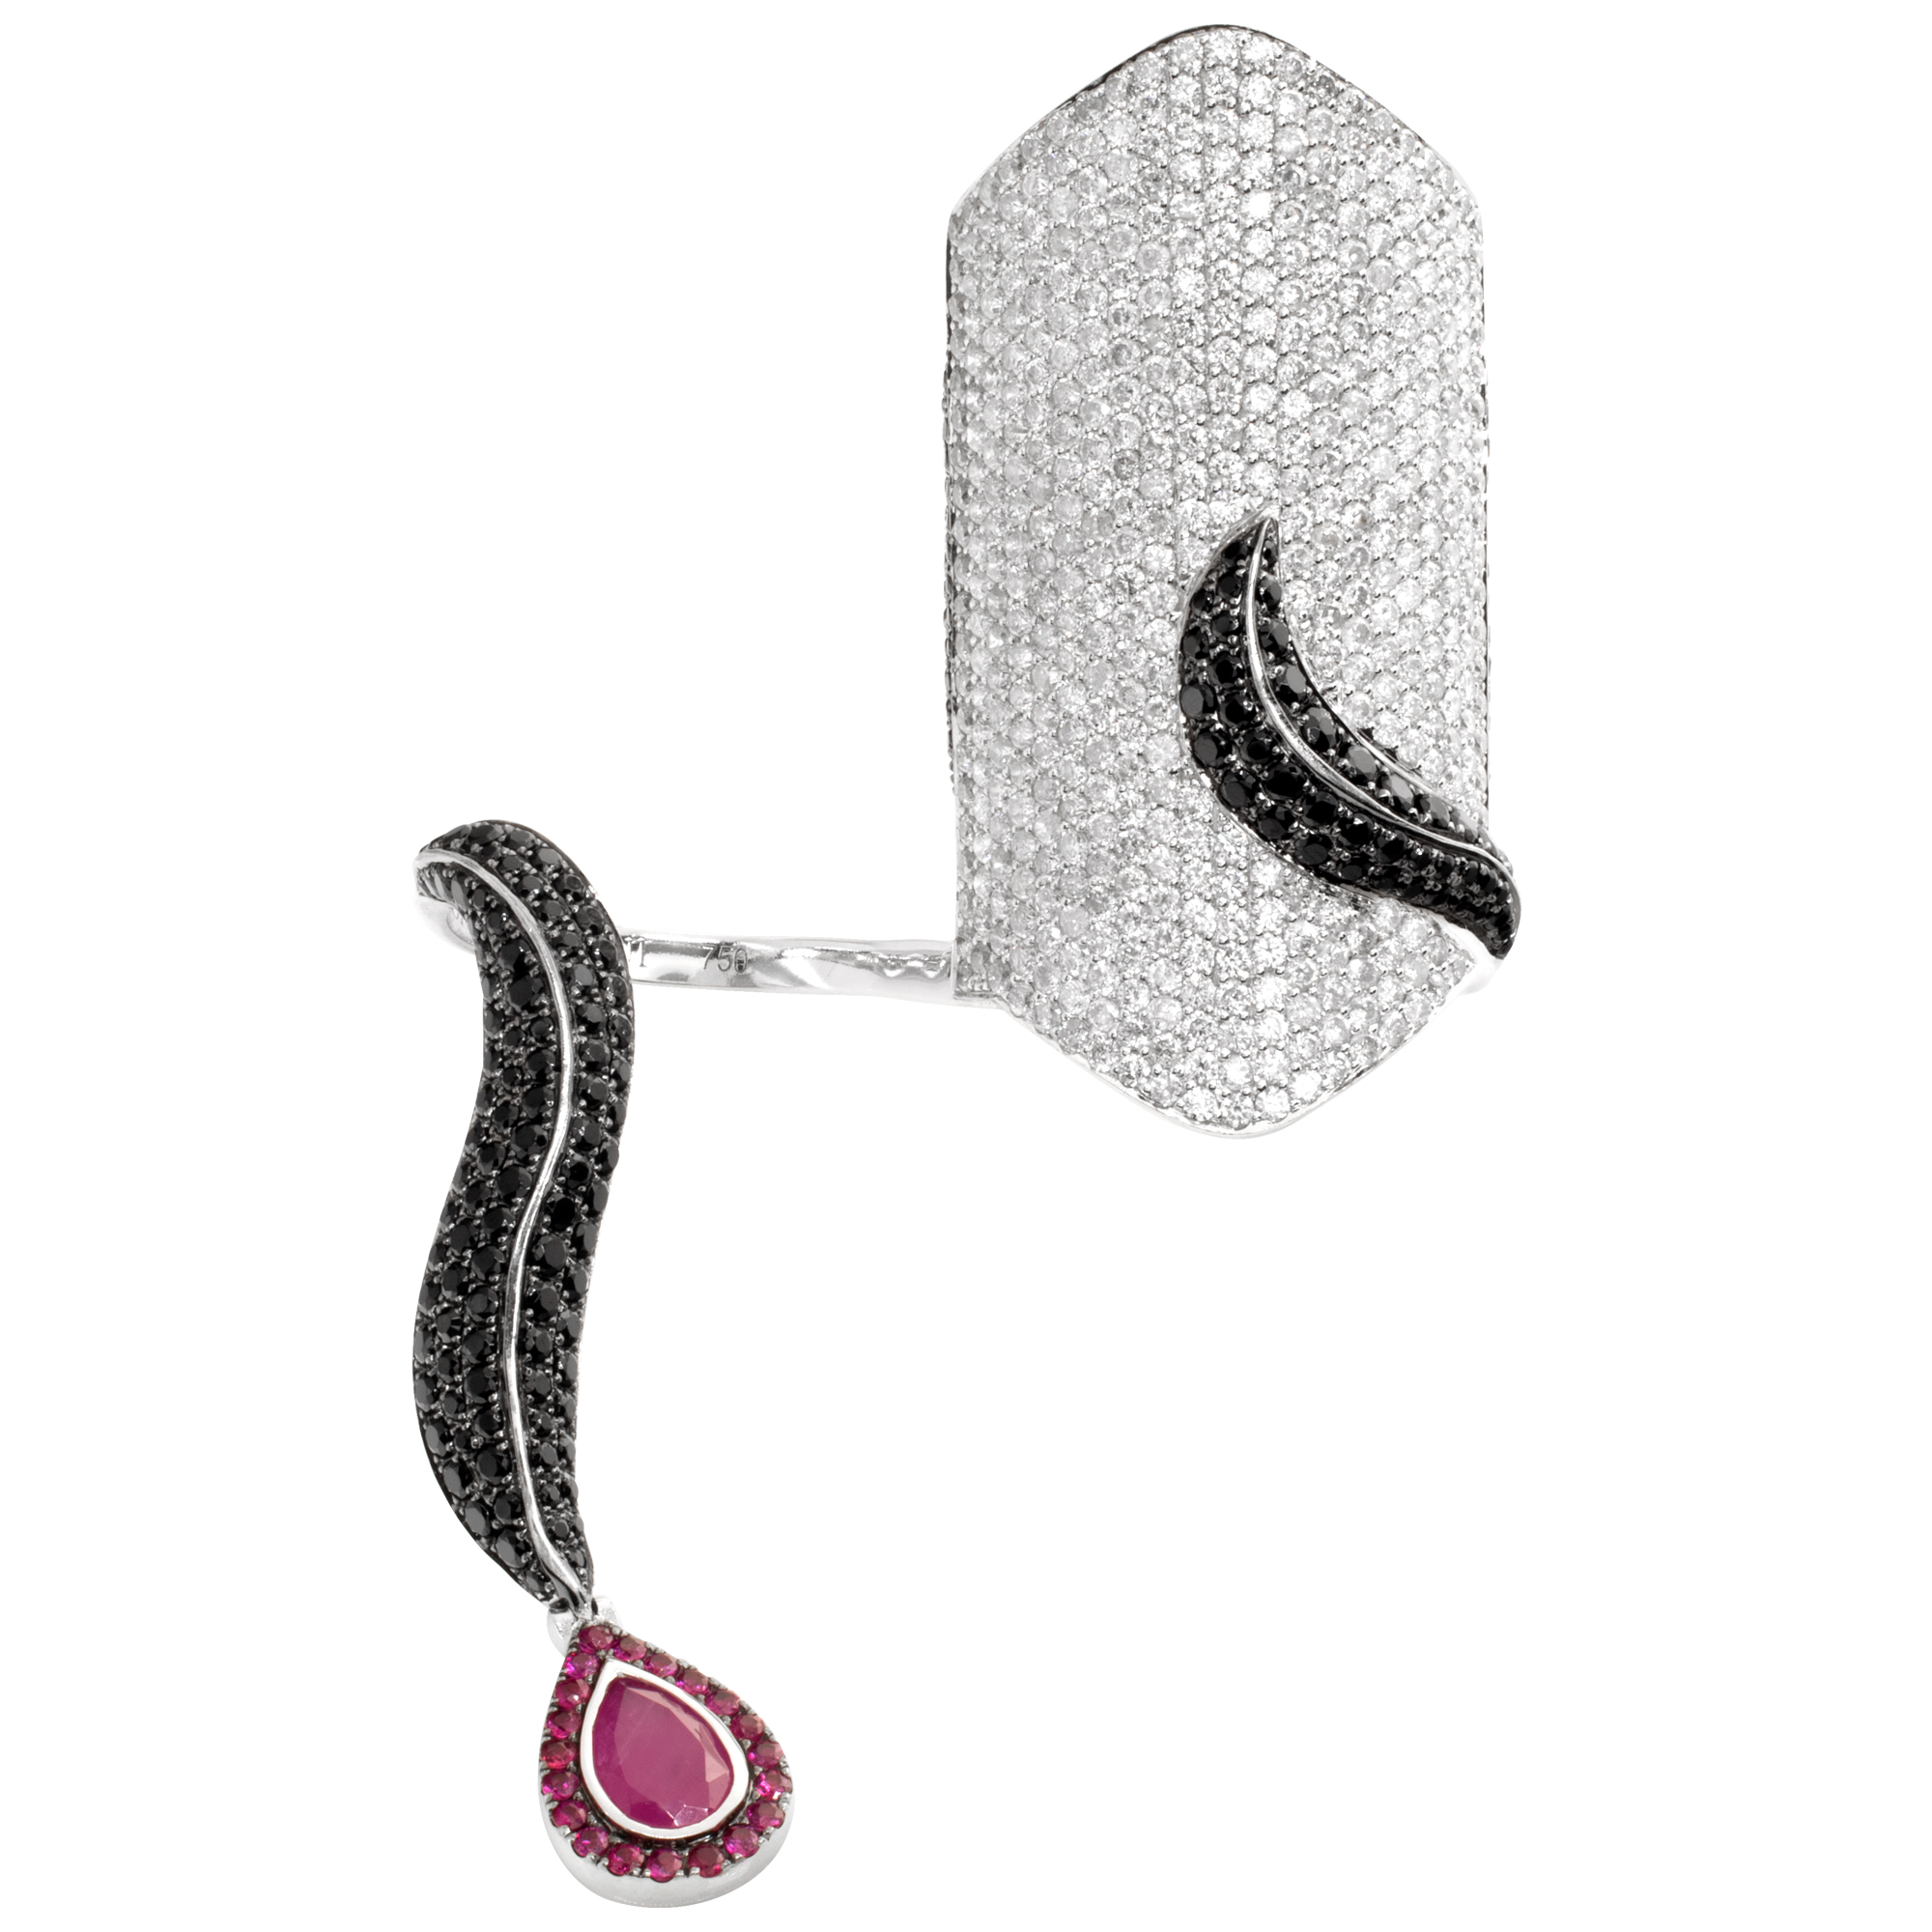 Dionea Orcini Double White & Black Diamonds Rings With Red Garnet In 18k White Gold.